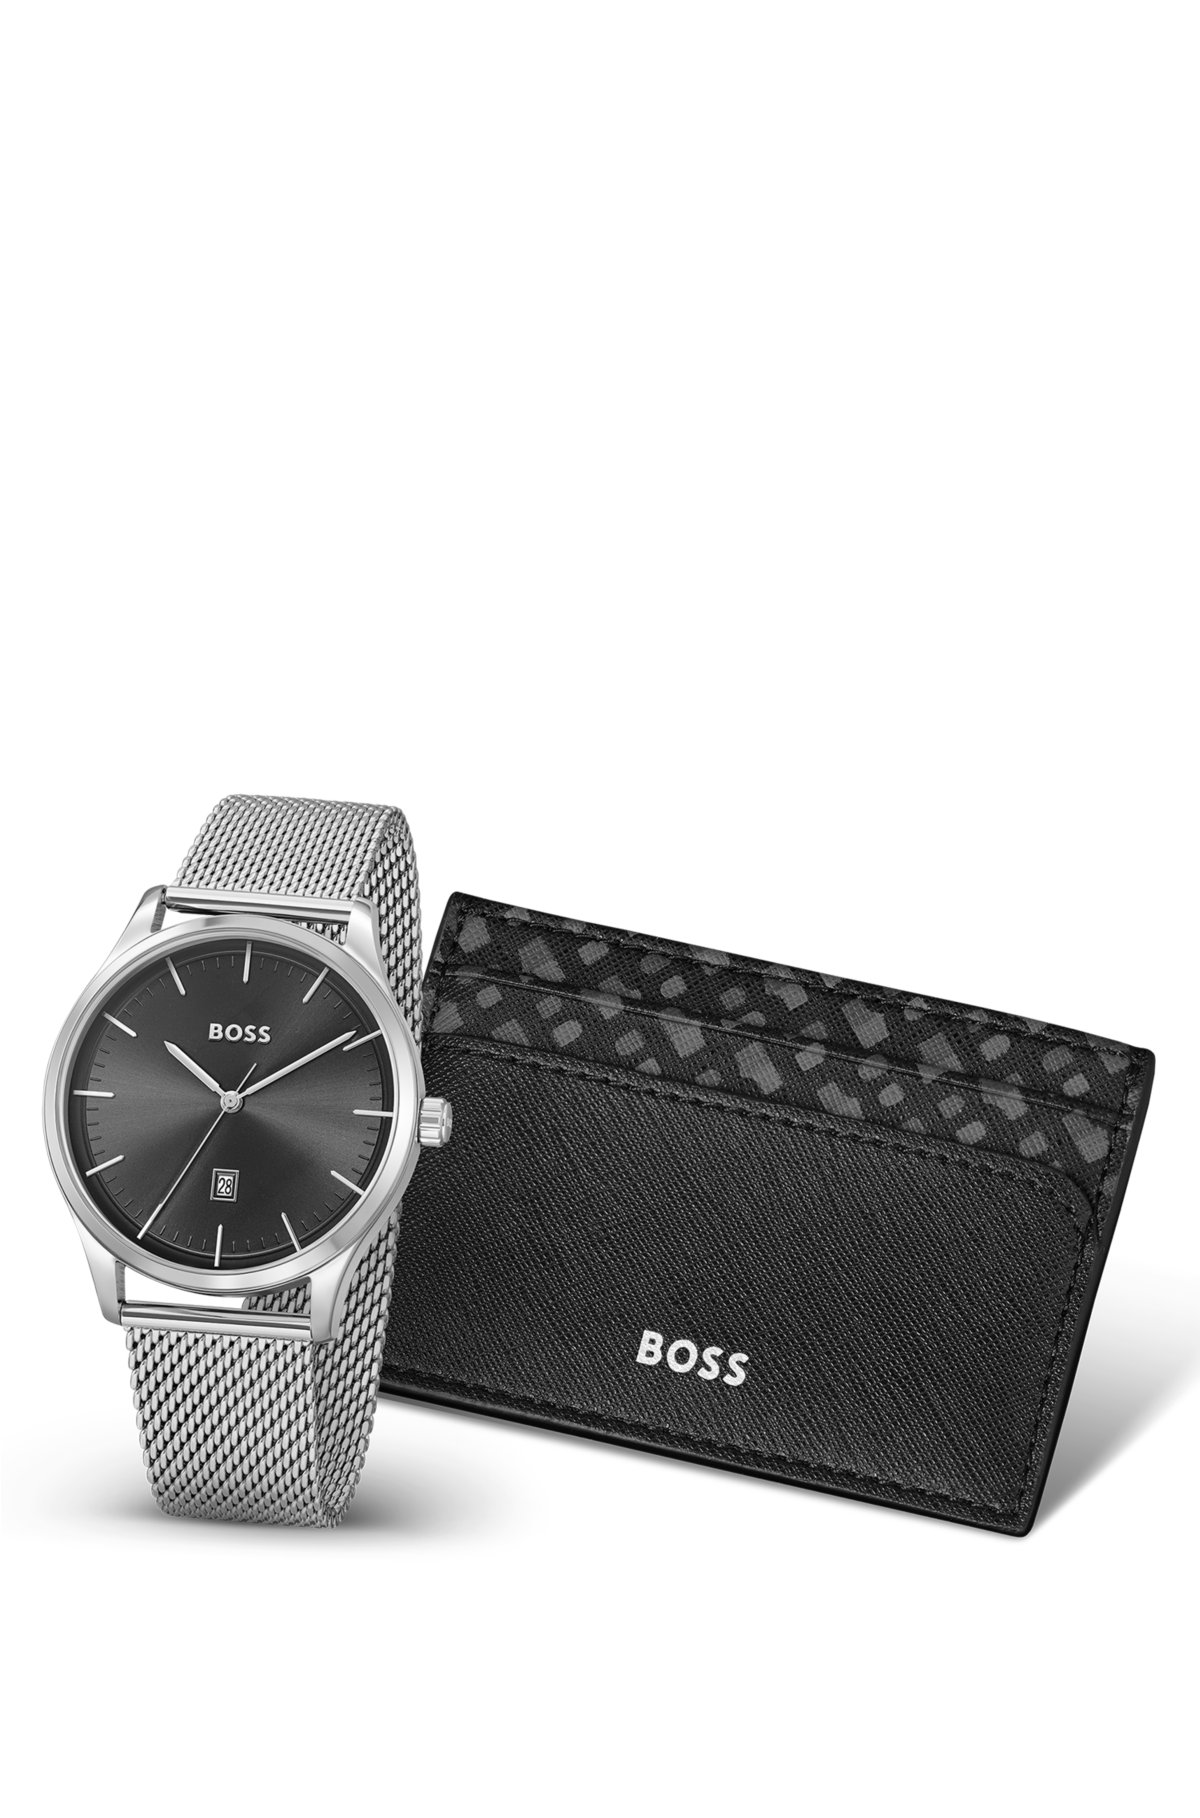 logo Gift-boxed - BOSS holder details watch with card and